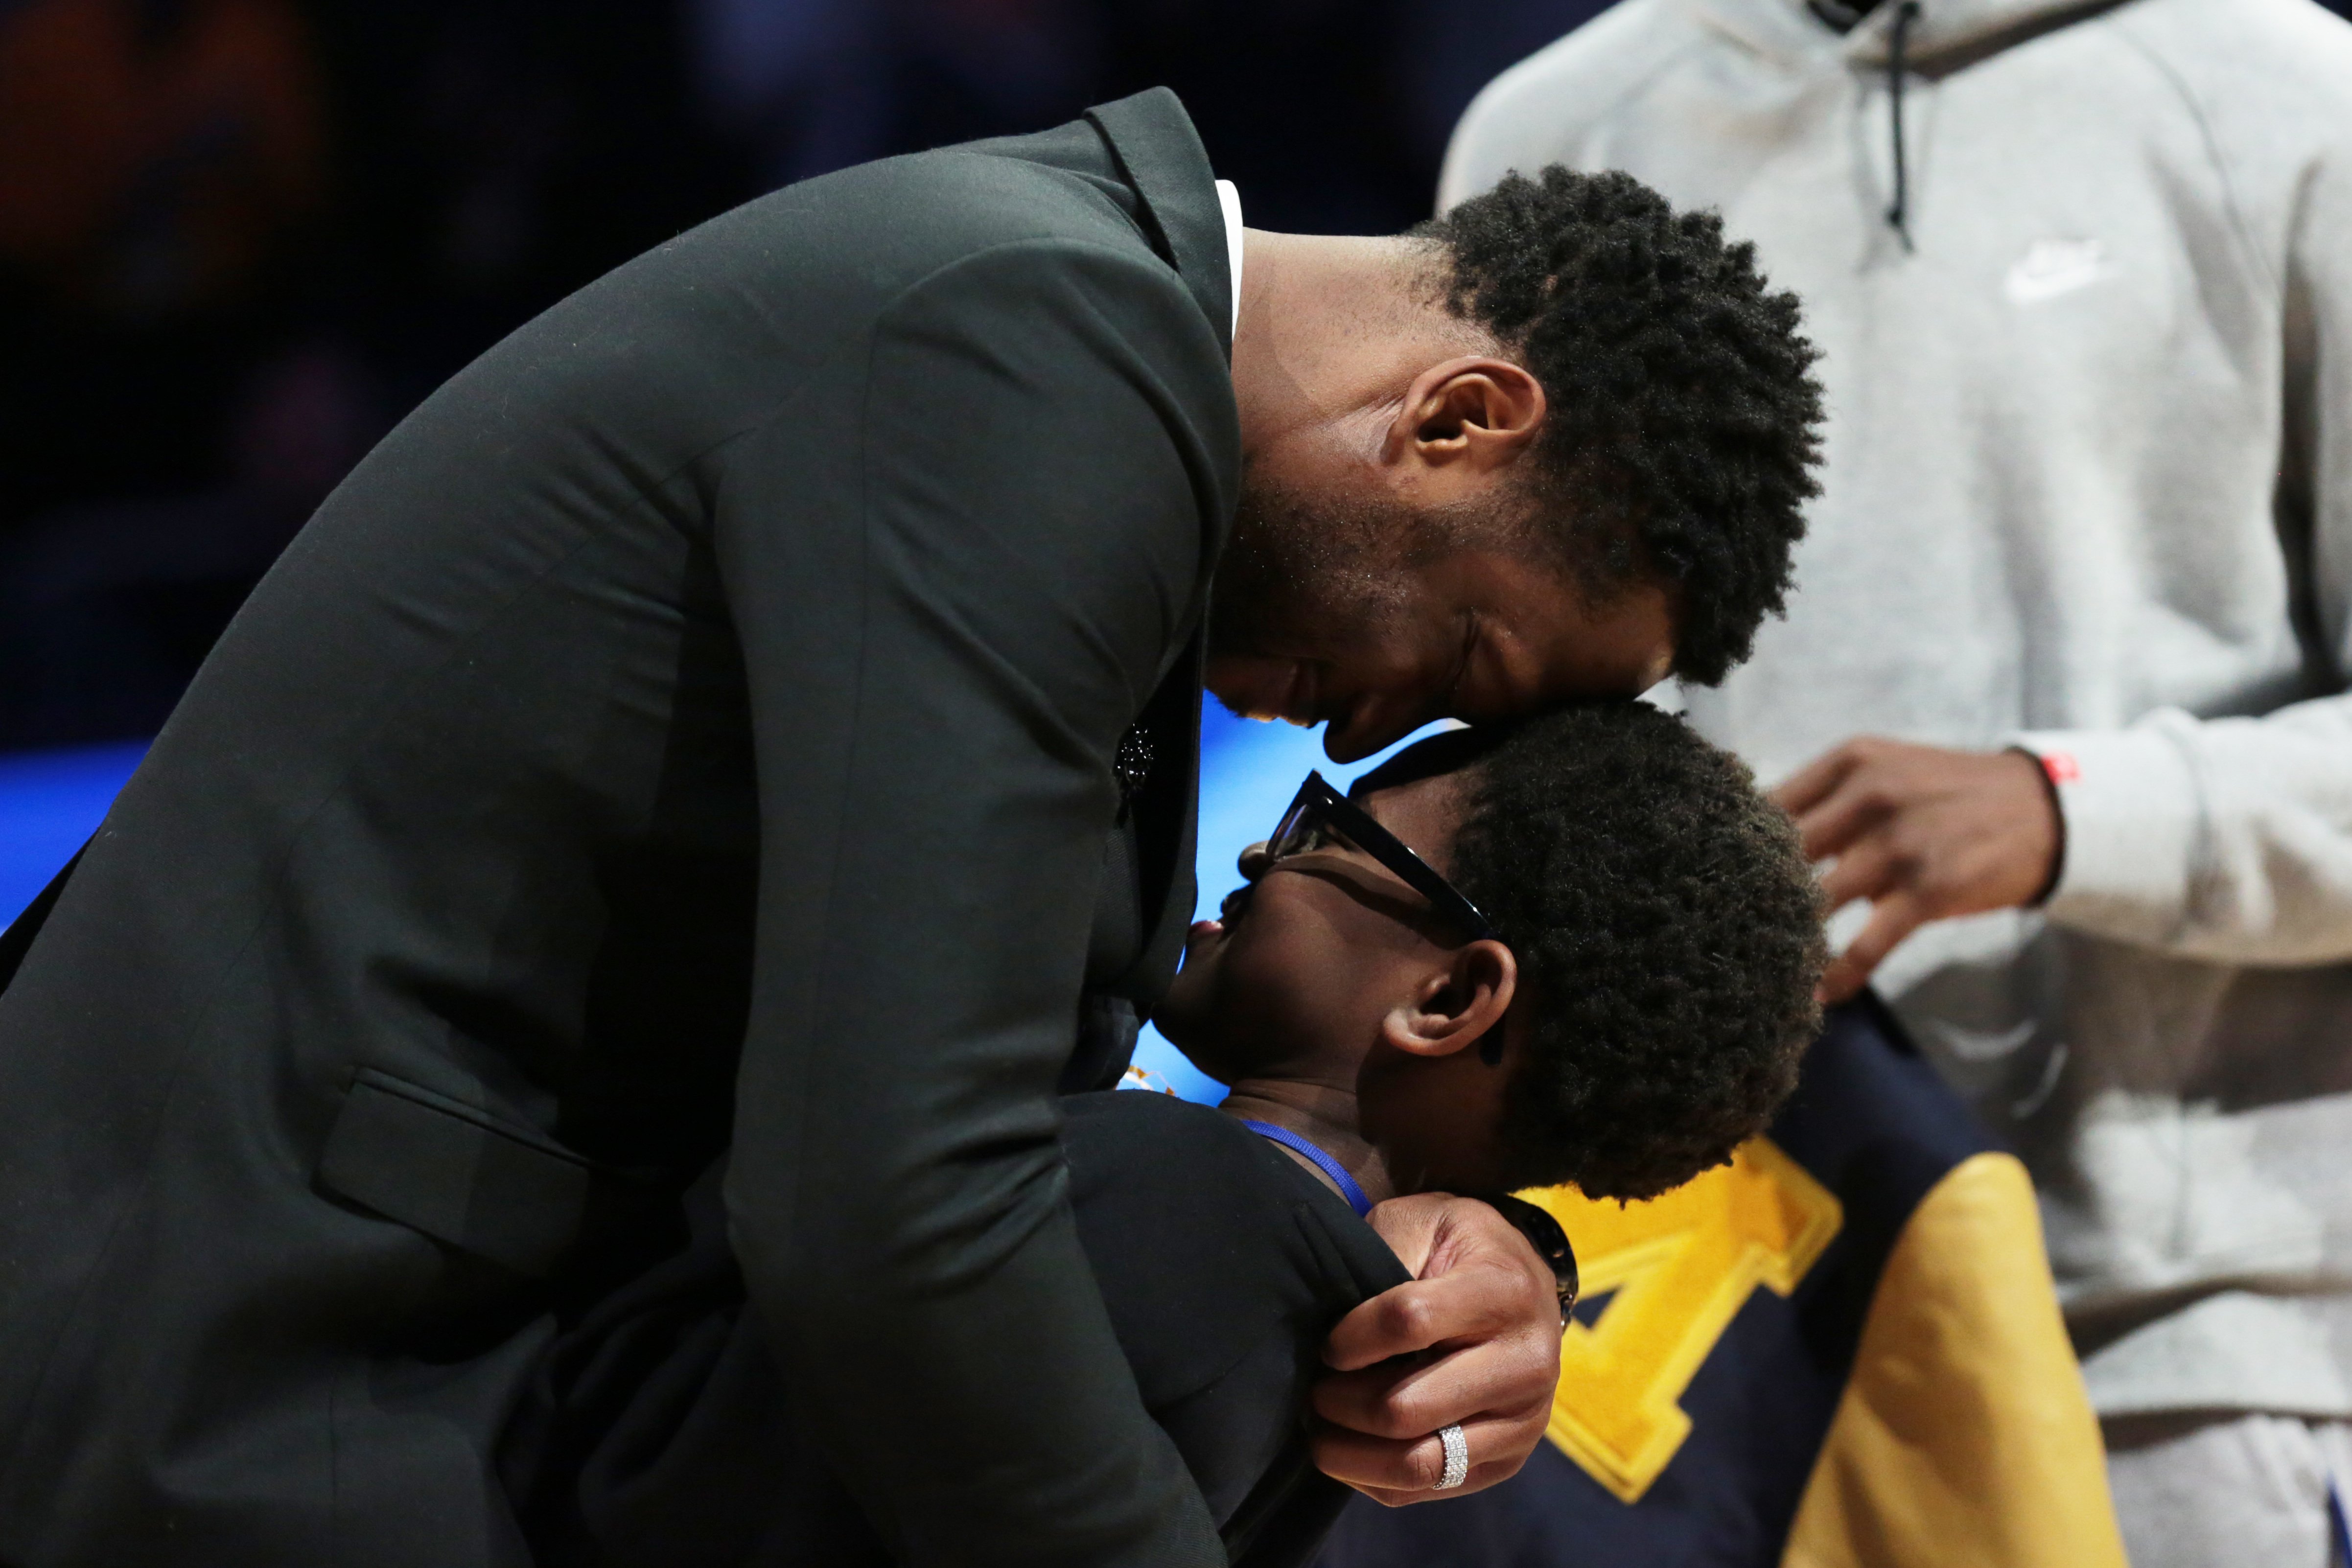 Dwyane Wade embraces his son Xavier during a game between the Marquette Golden Eagles and the Providence Friars on January 20, 2019, in Milwaukee, WI. | Source: Getty Images